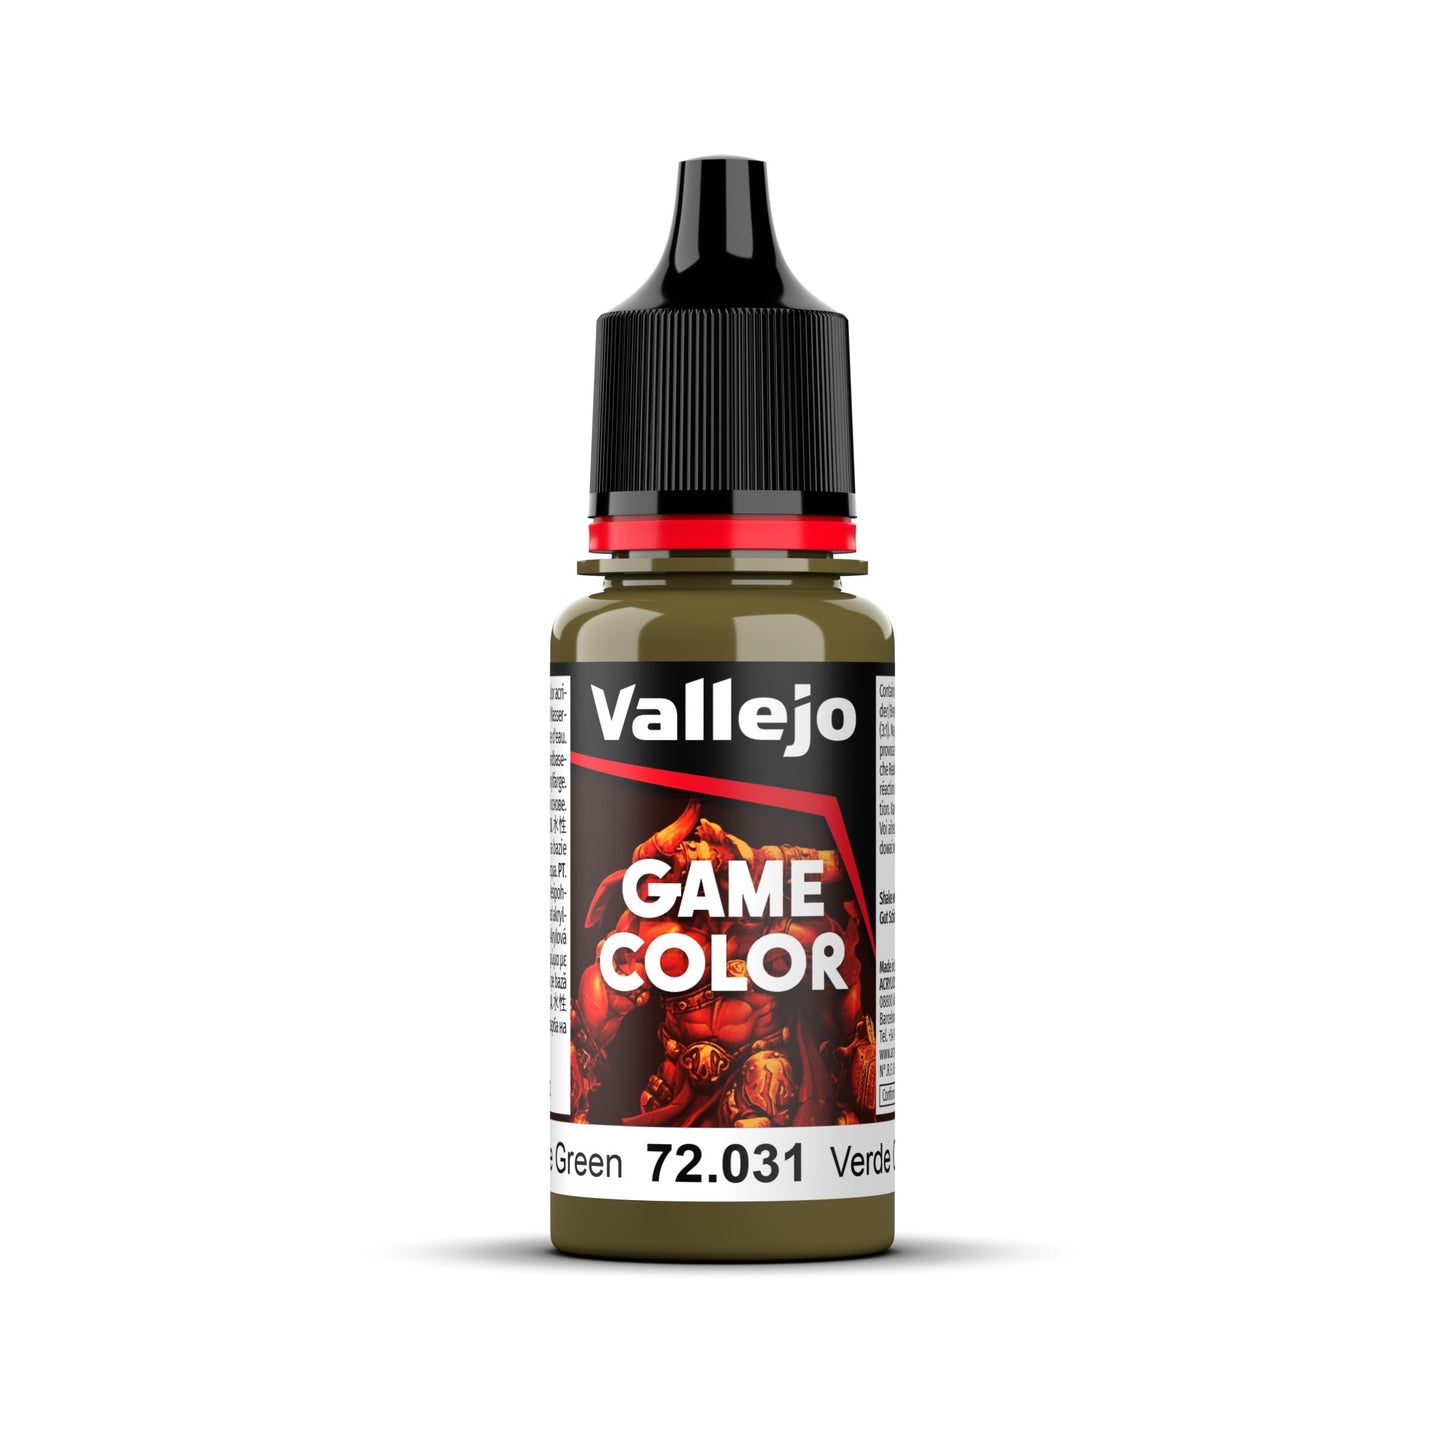 Vallejo Game Colour - Camouflage Green 18ml